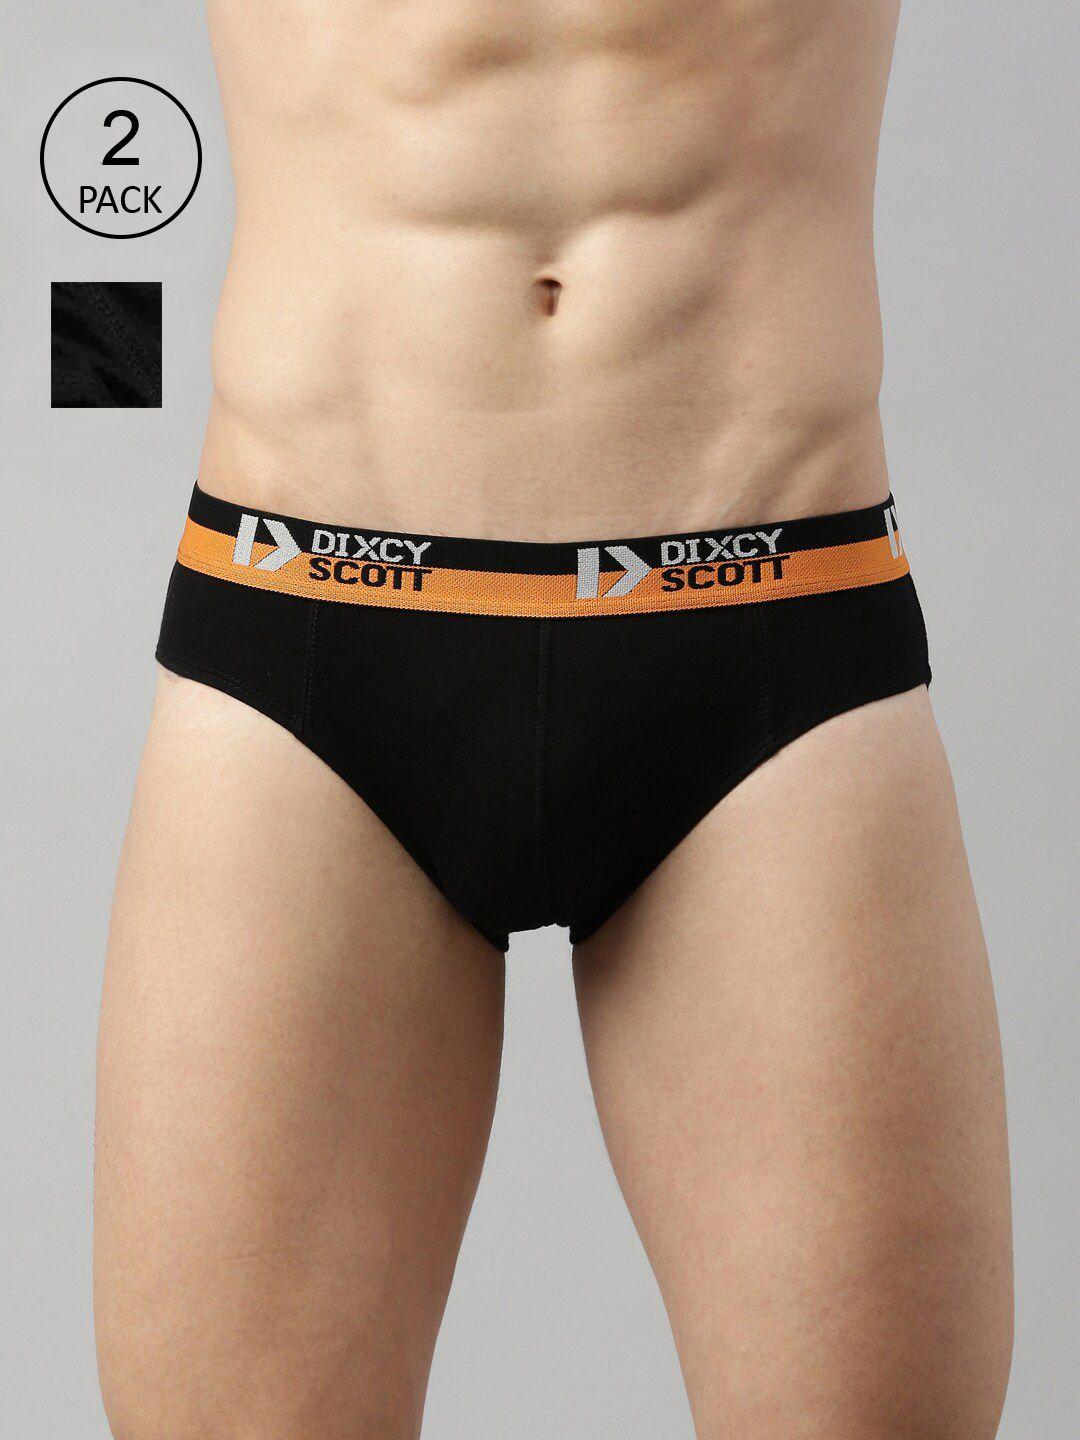 dixcy scott men pack of solid pure cotton mid-rise basic briefs